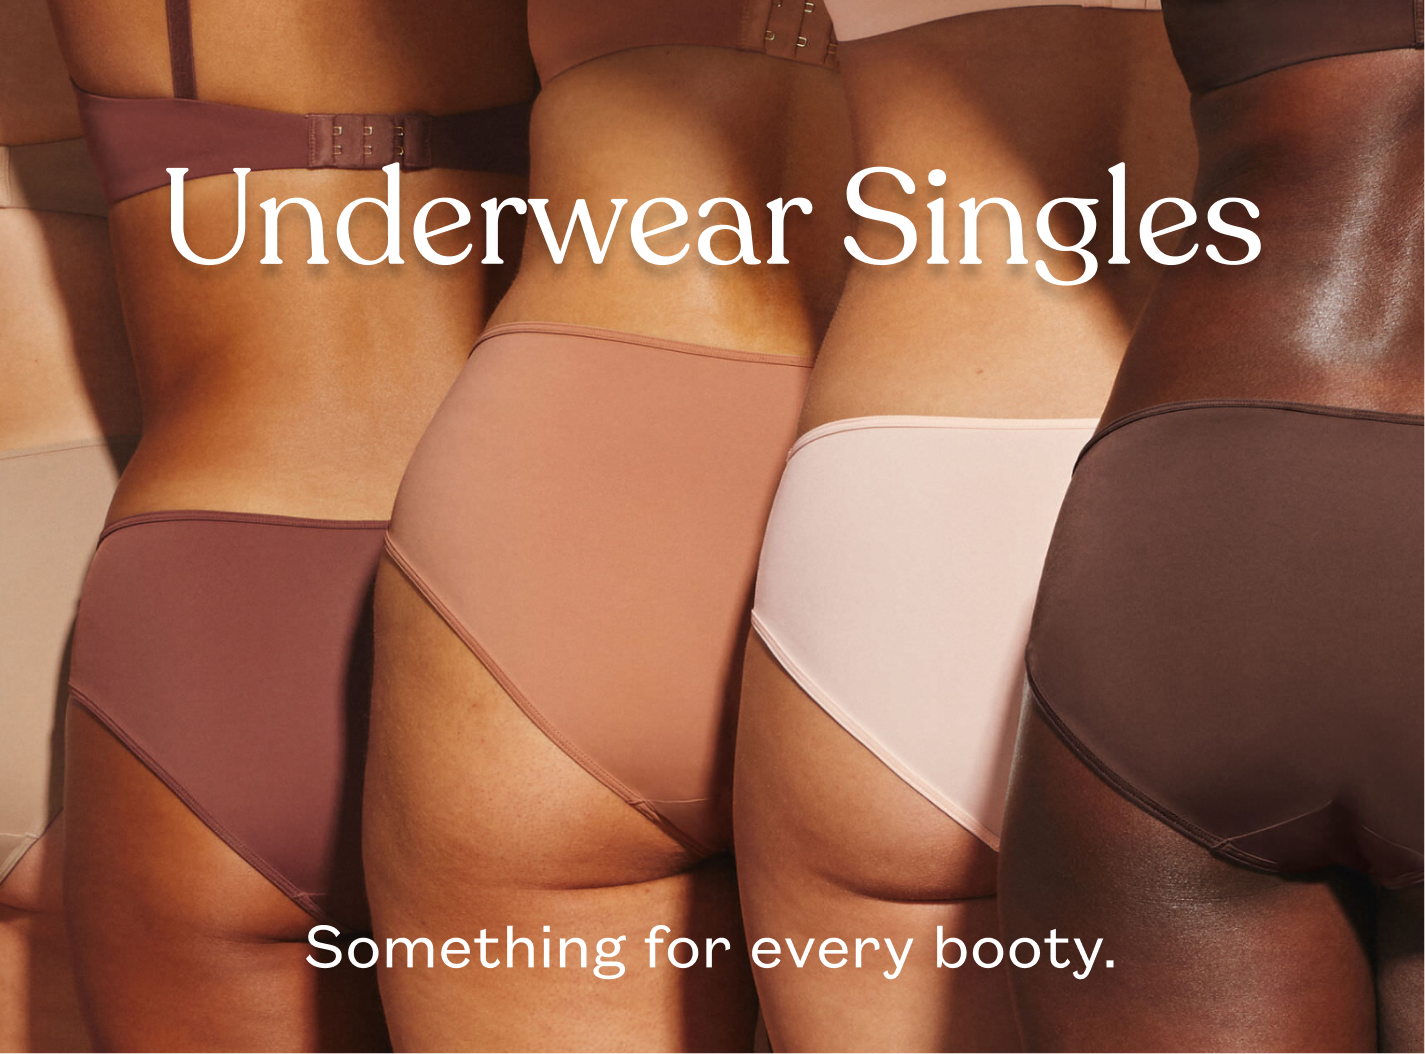 The All-In Panty: Single